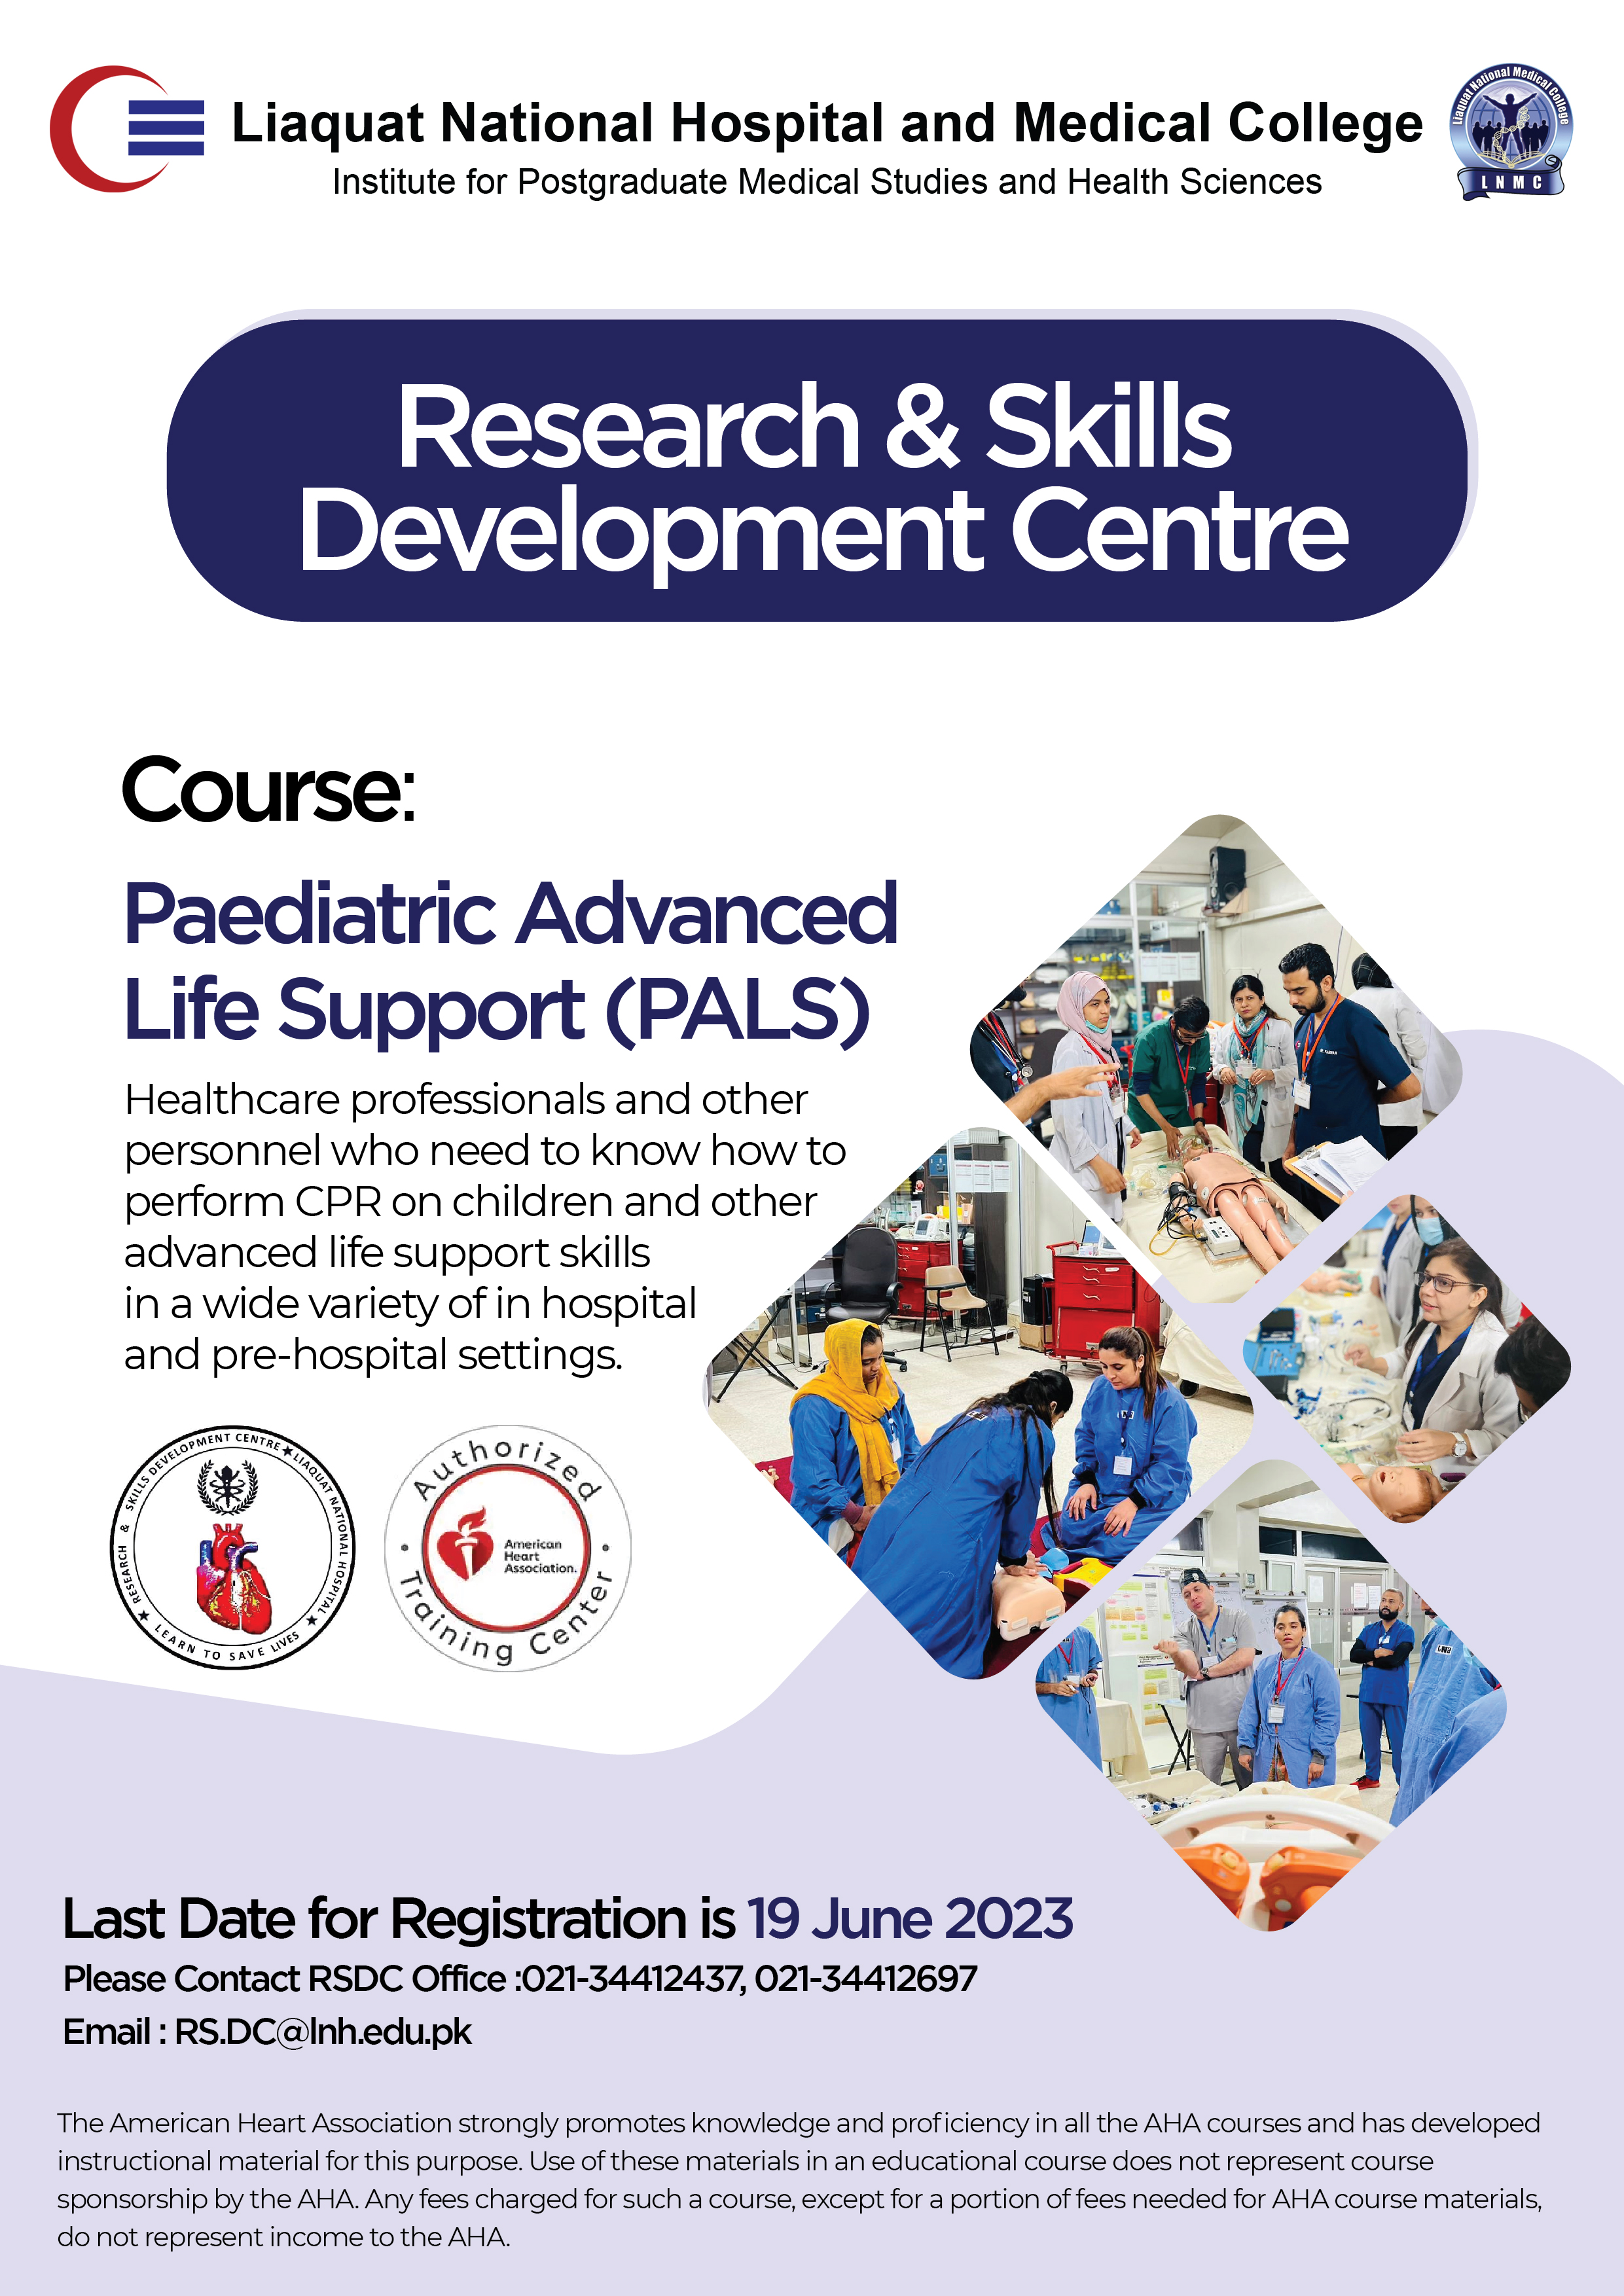 Paediatric Advanced Life Support Course (PALS)